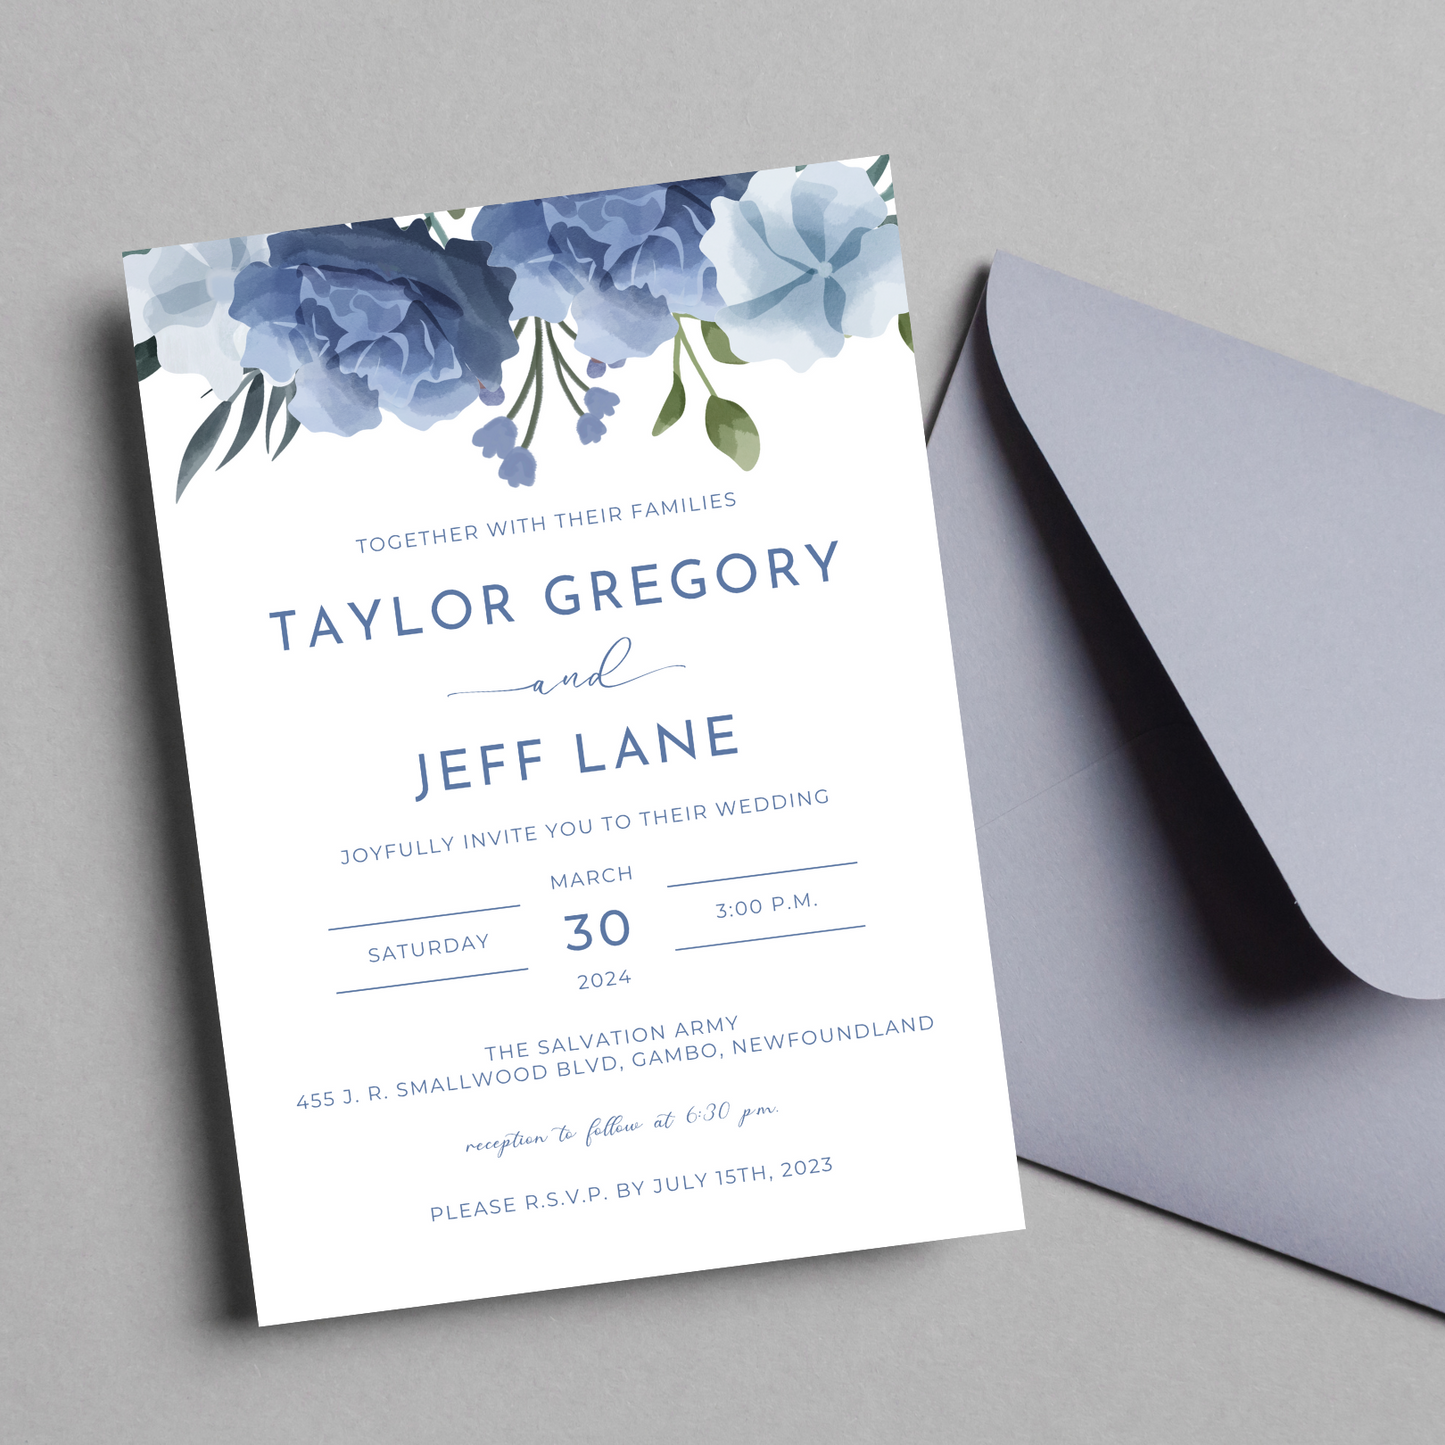 A wedding invitation with dusty blue flowers featured at the top lays on a light grey background. A blue-grey envelope is nestled underneath the invitation.